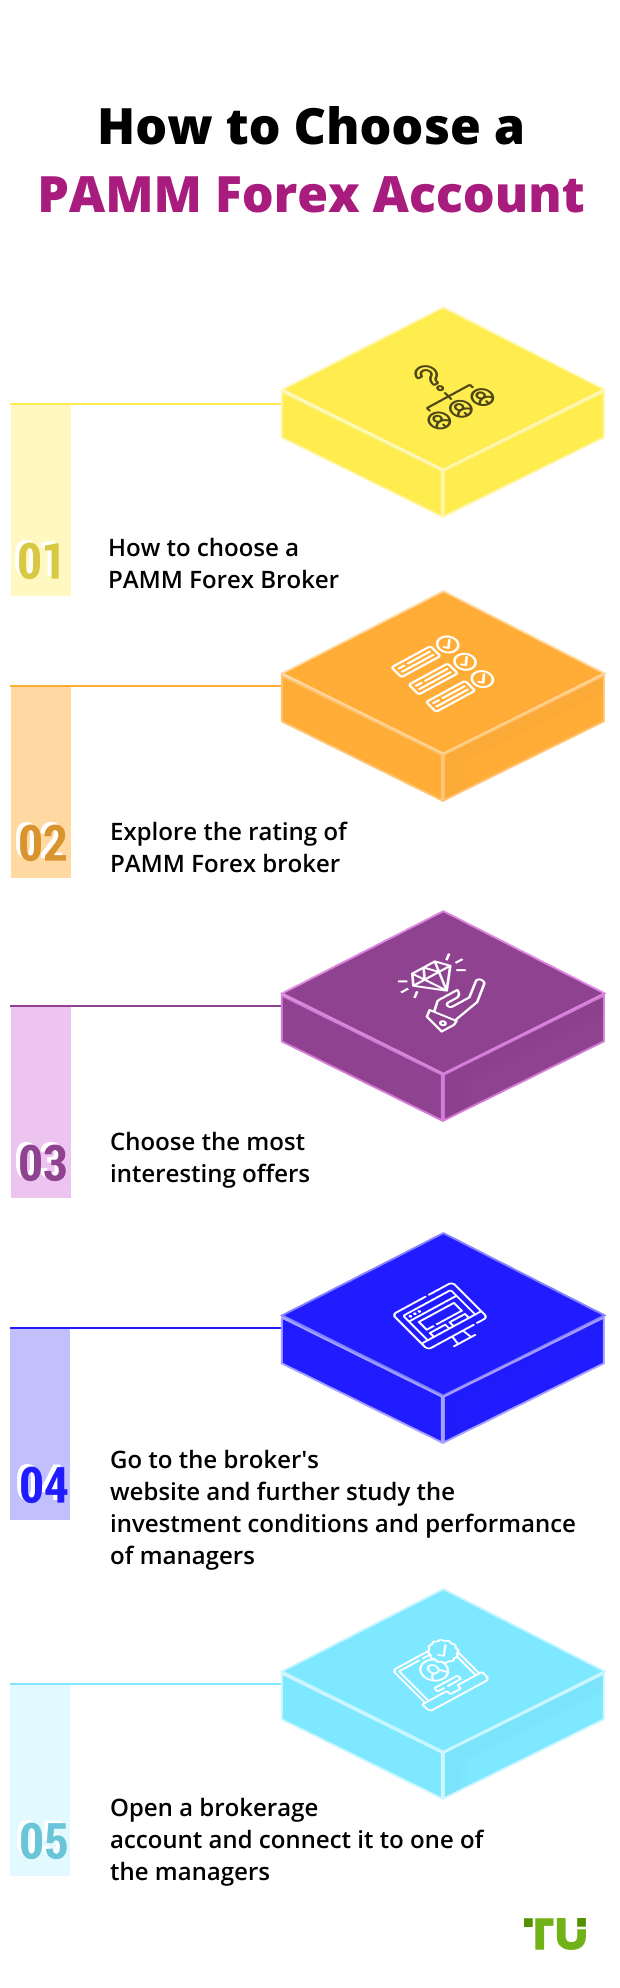 Pamm forex malaysia training set and forget investing in real estate